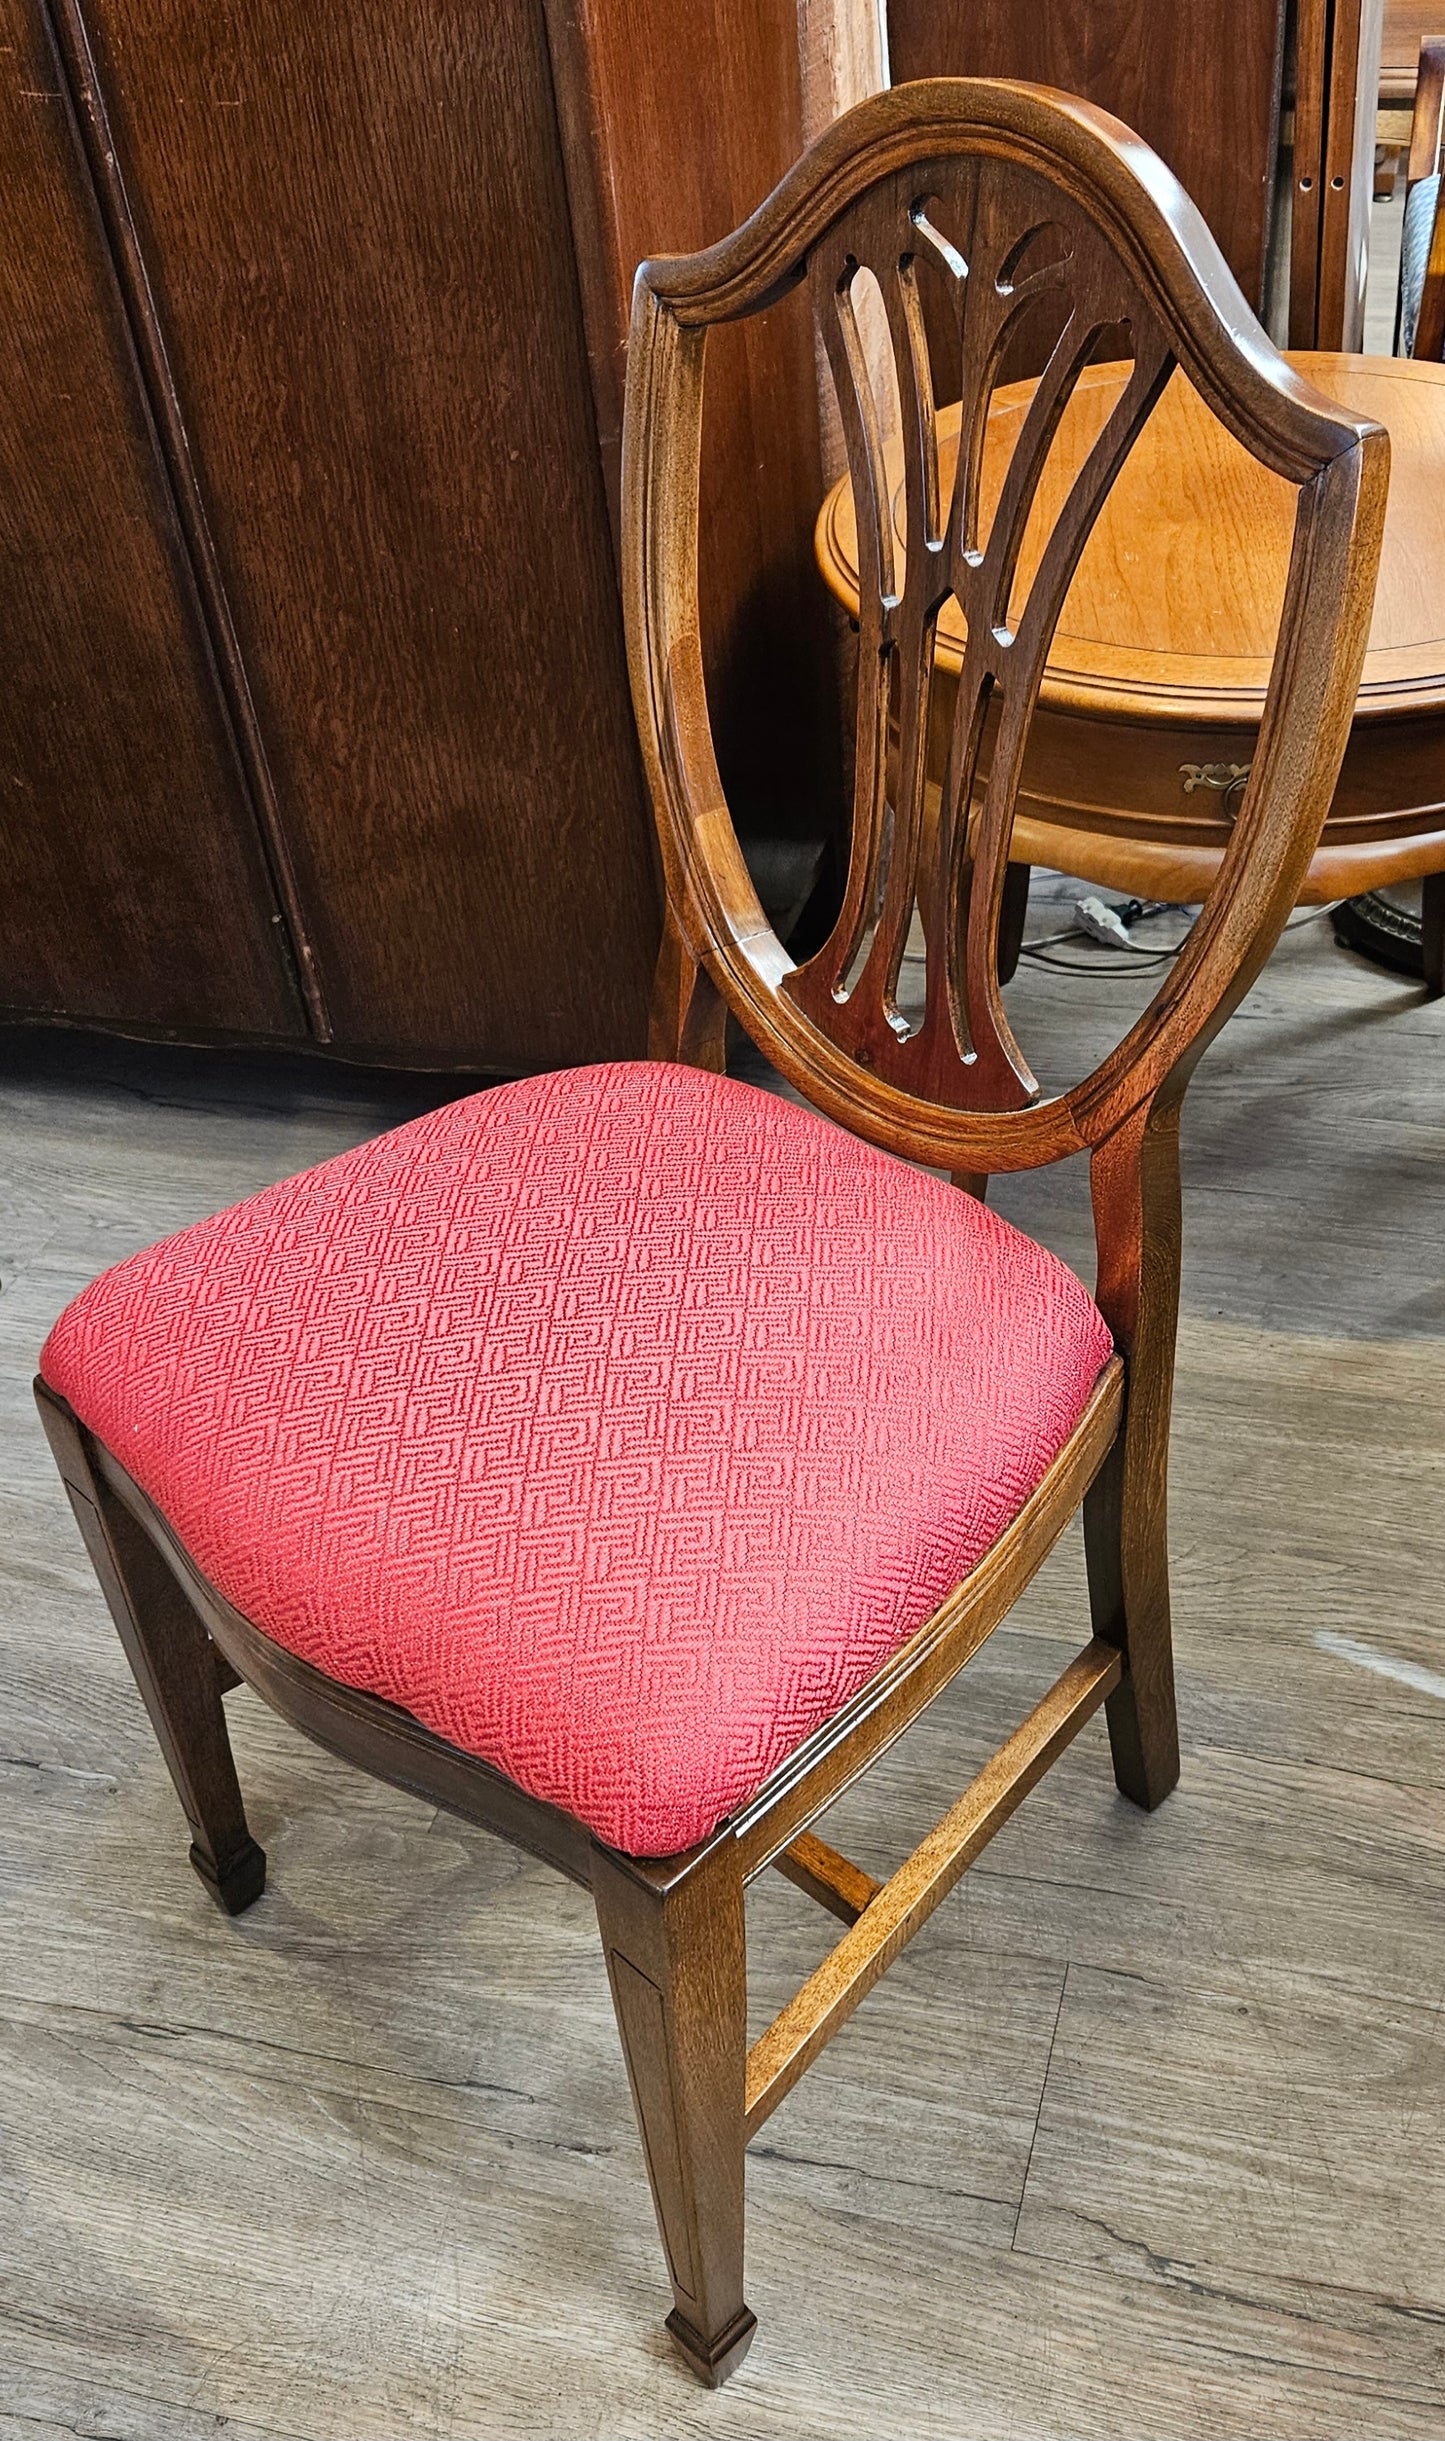 Pink/red upholstered shield chair